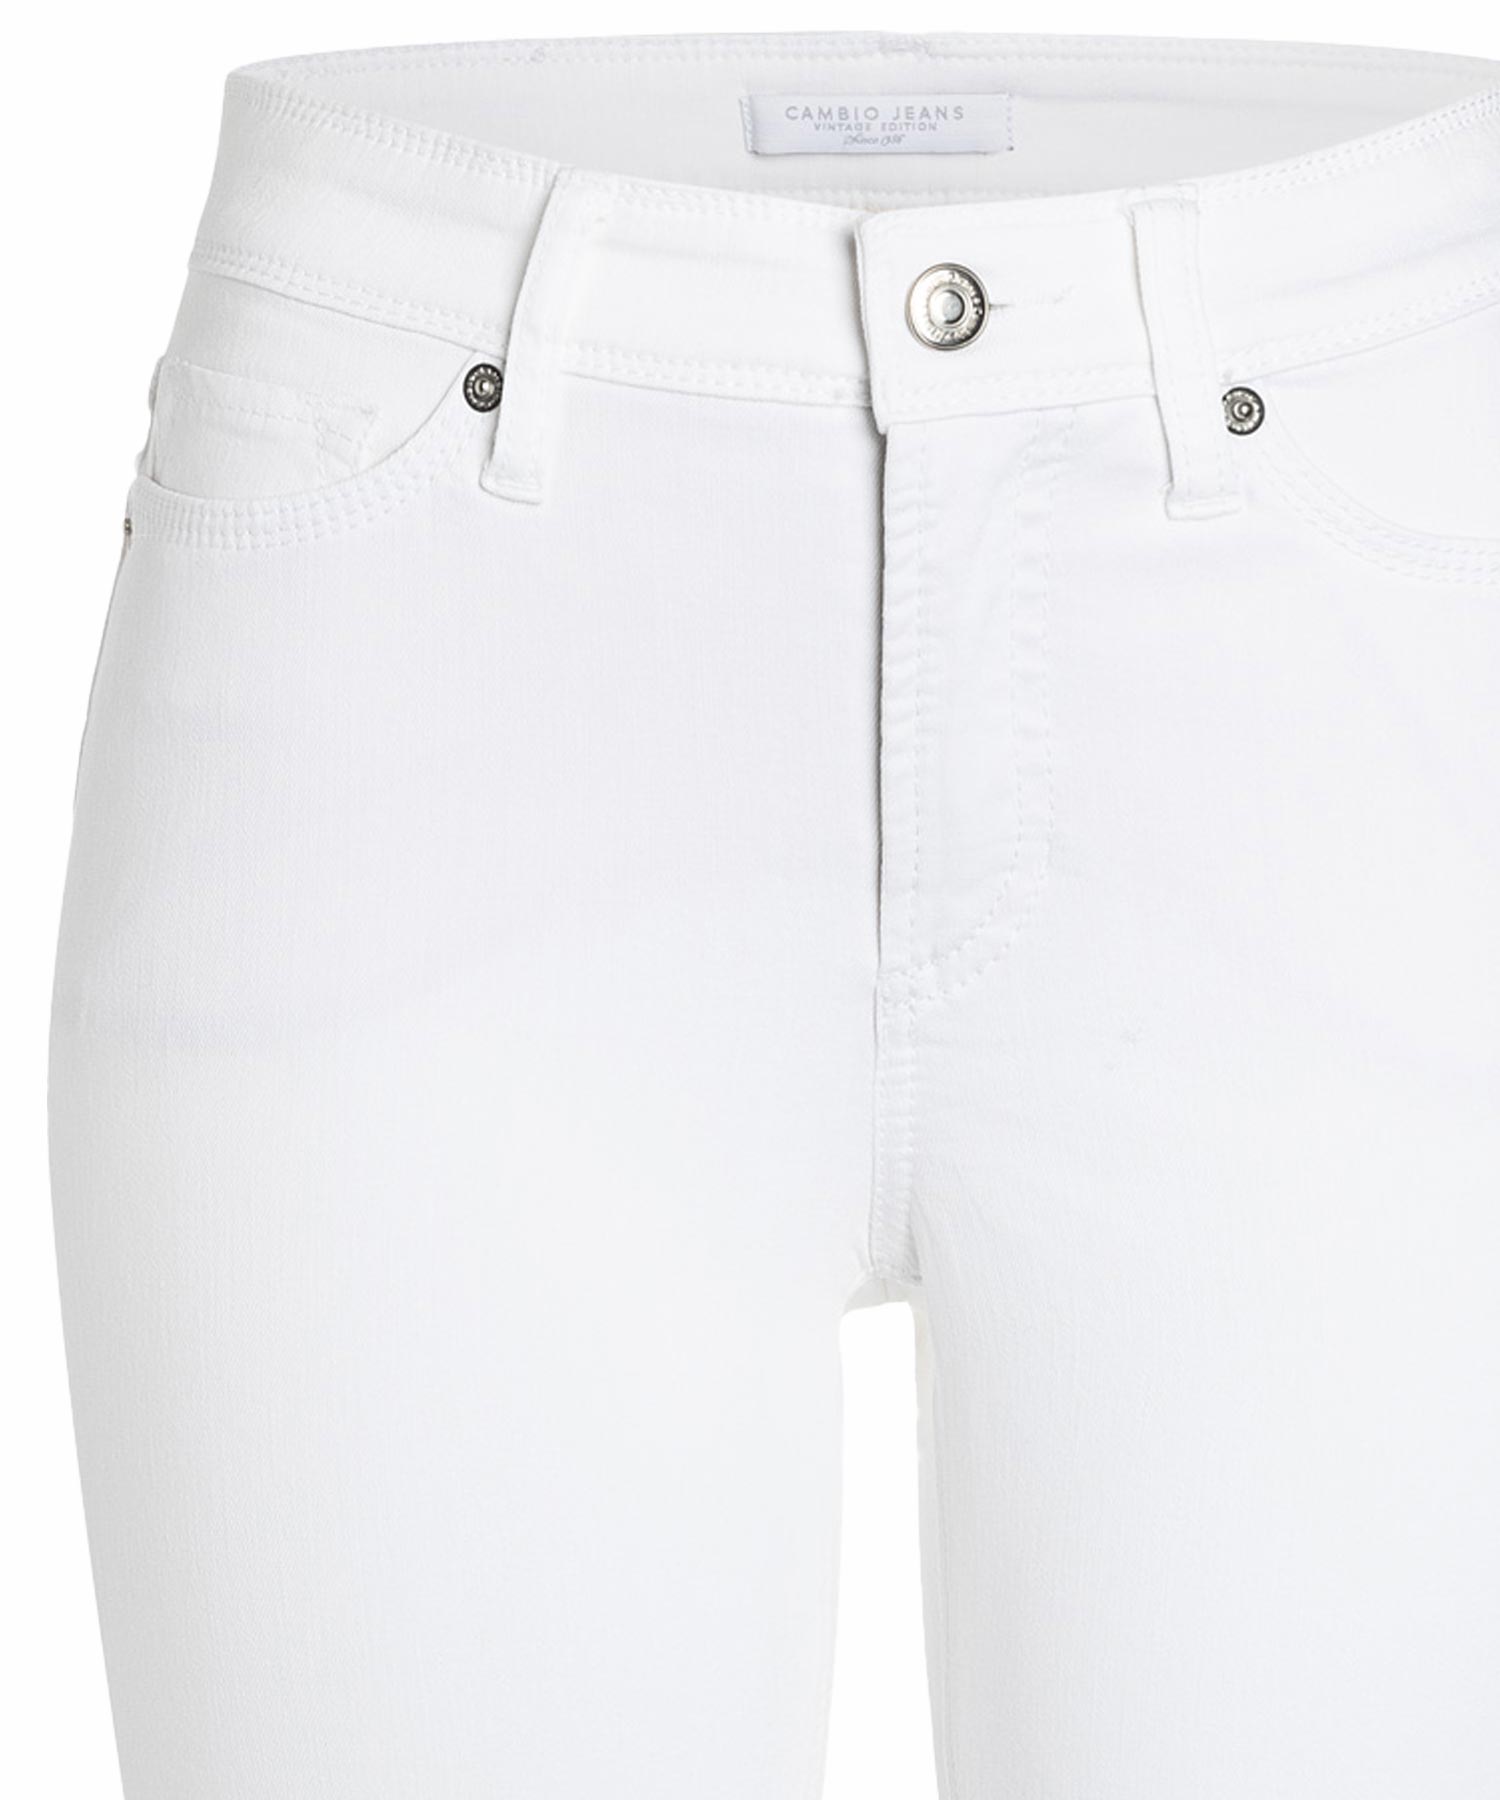 Cambio Jeans Piper short in weiss